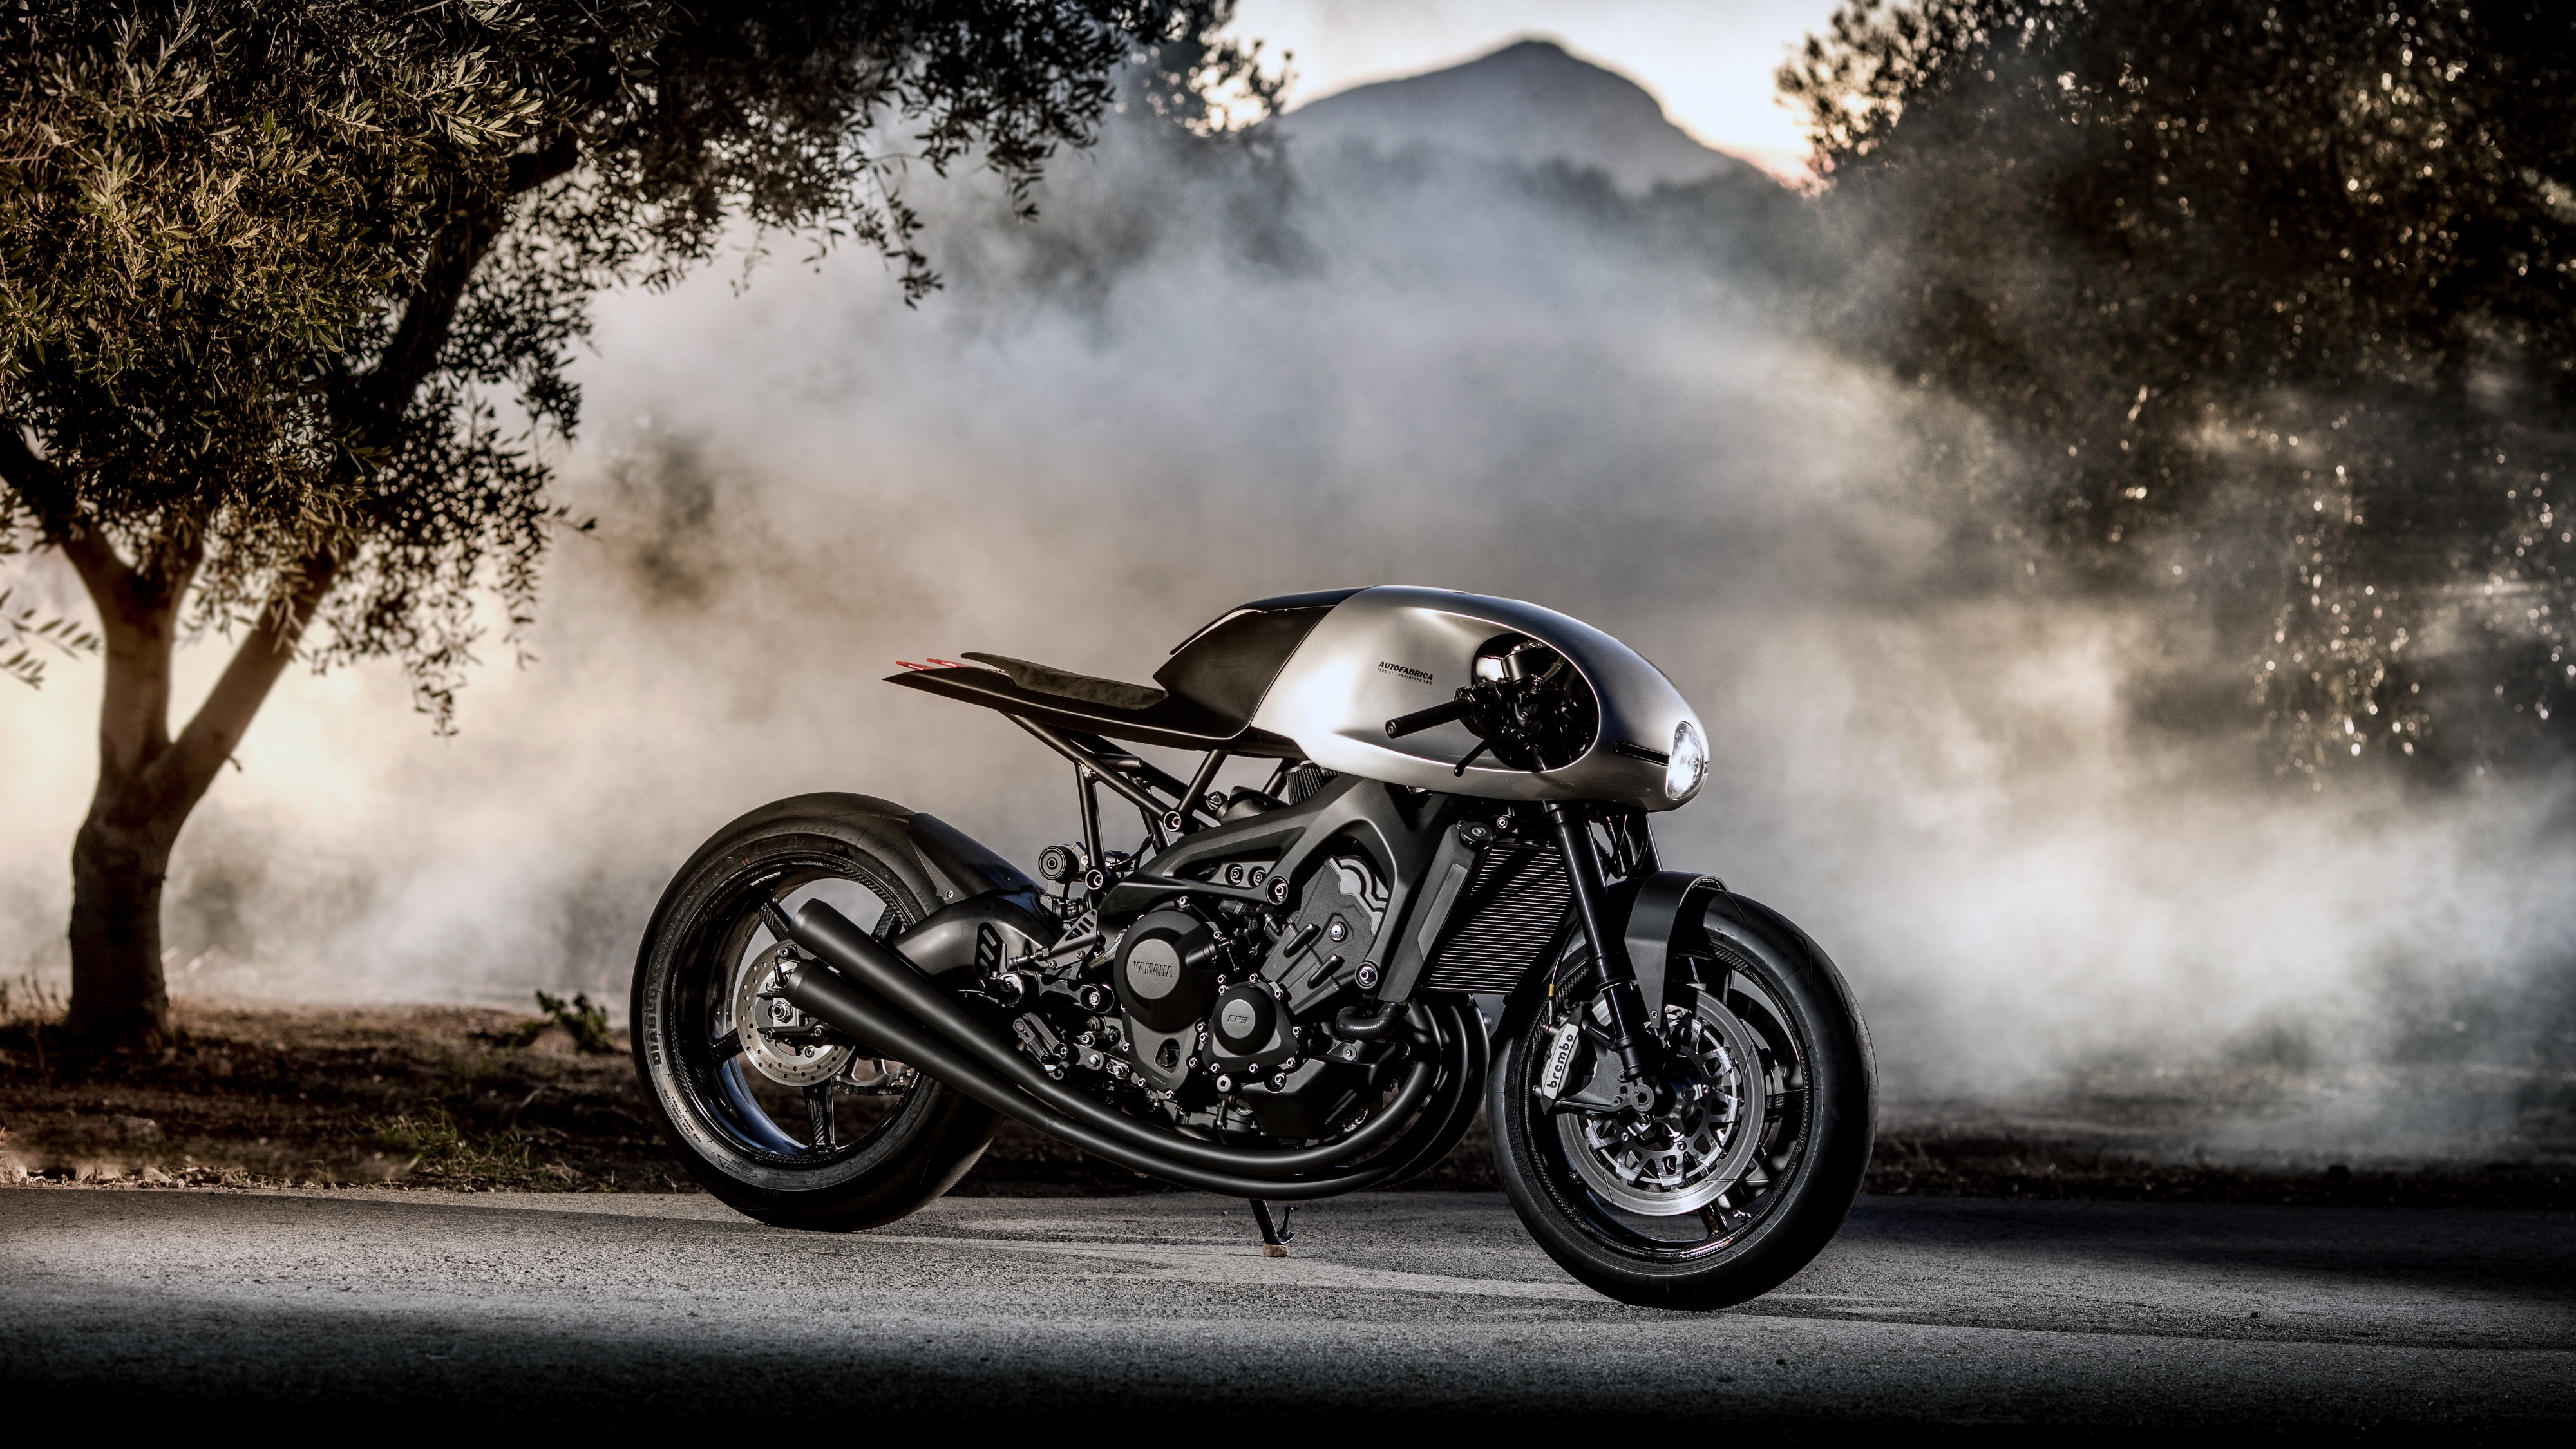 HD wallpaper, Concept Bikes, 2020, Cafe Racer, Type 11 Prototype Two, Auto Fabrica